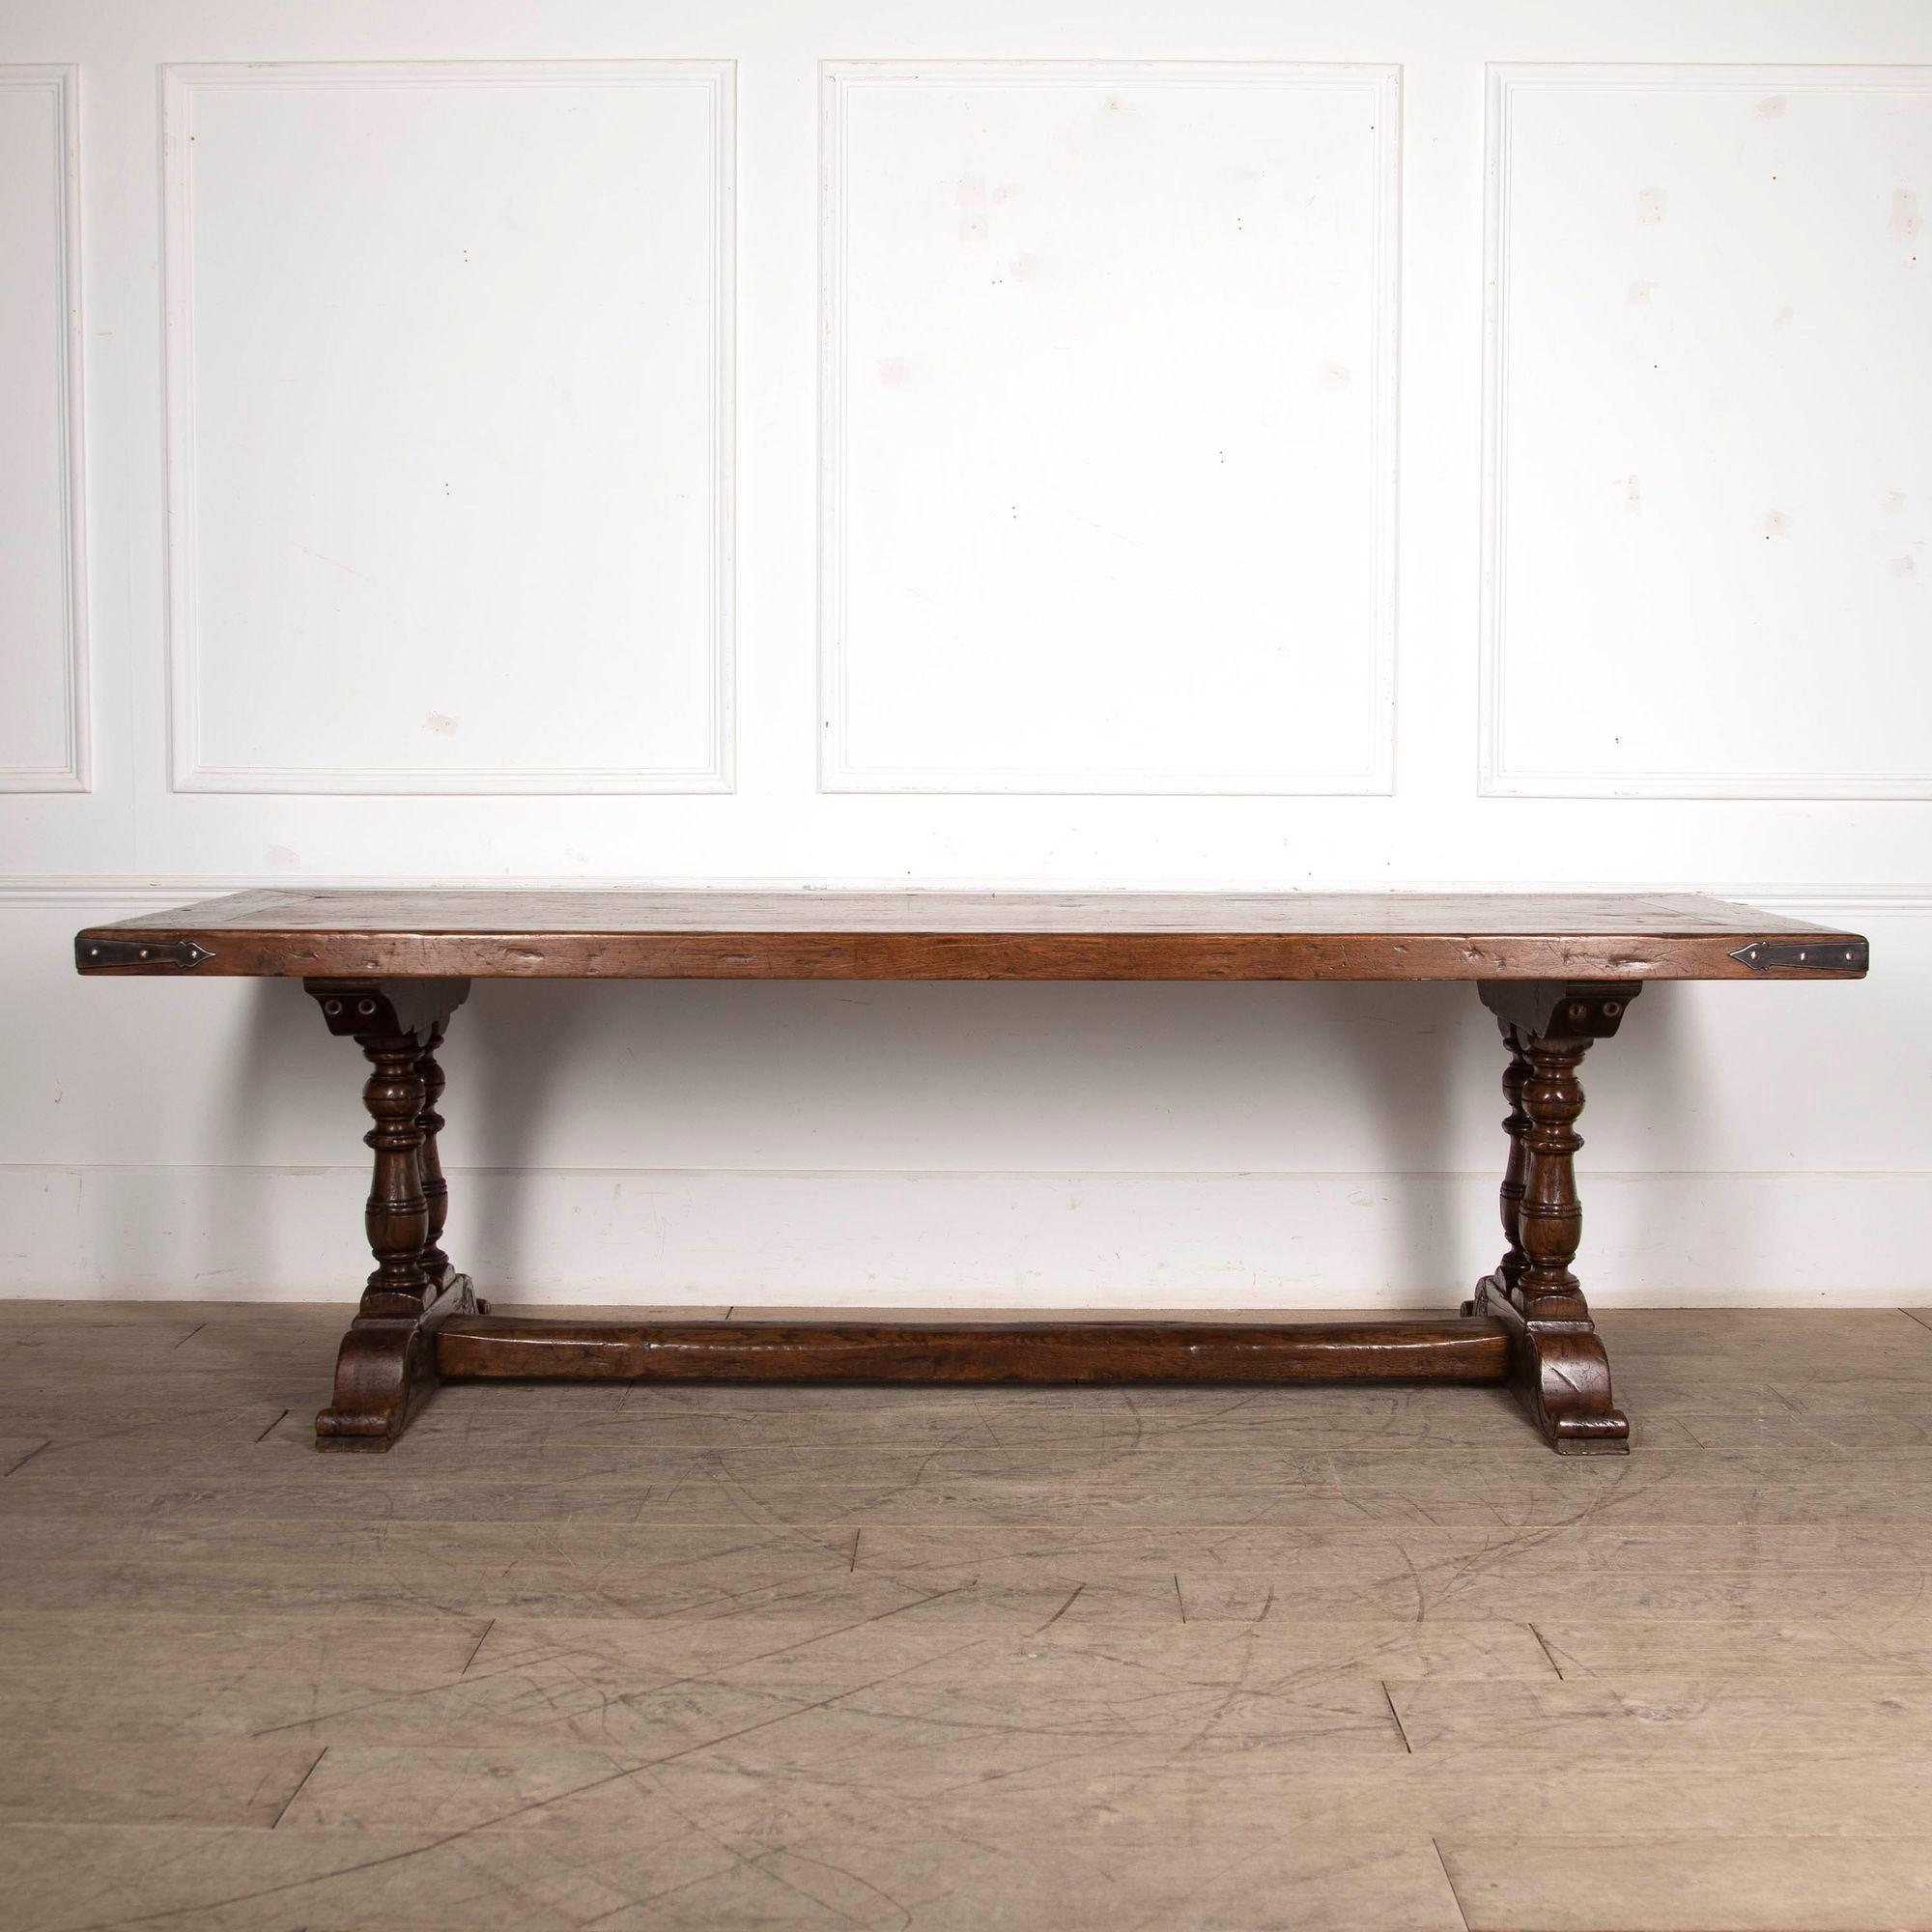 Wonderful 20th century style oak refectory table on twin baluster columns.
With metal banding on the corners, this is a great practical table to sit at.
With the over hang on the ends this table will sit 10 to 12 people.
For ease of delivery the